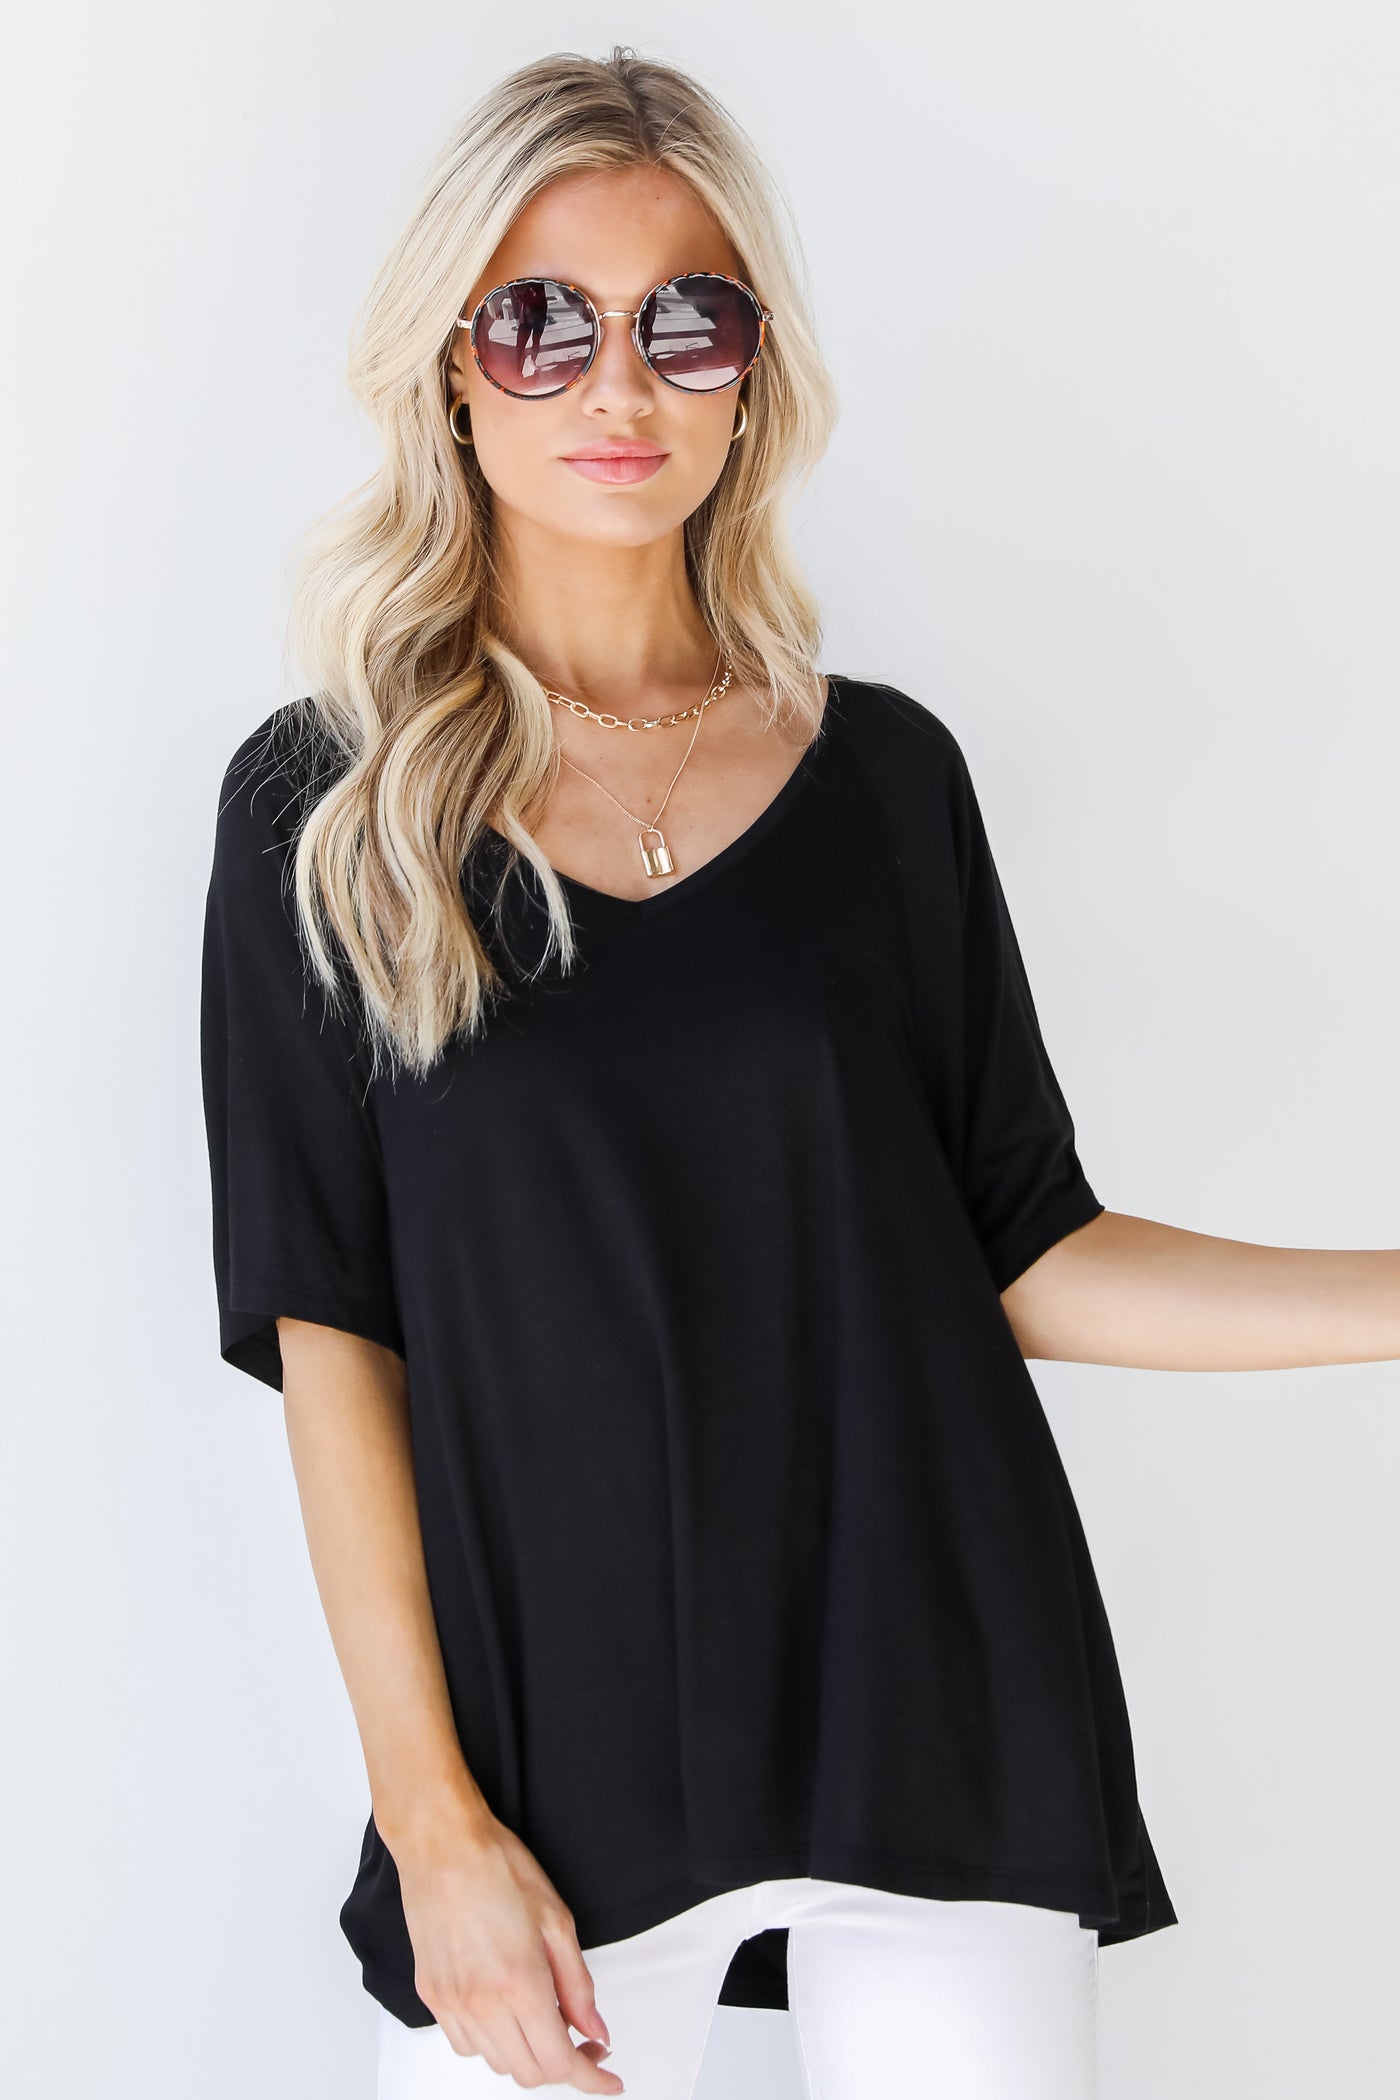 Jersey Knit Tee in black front view